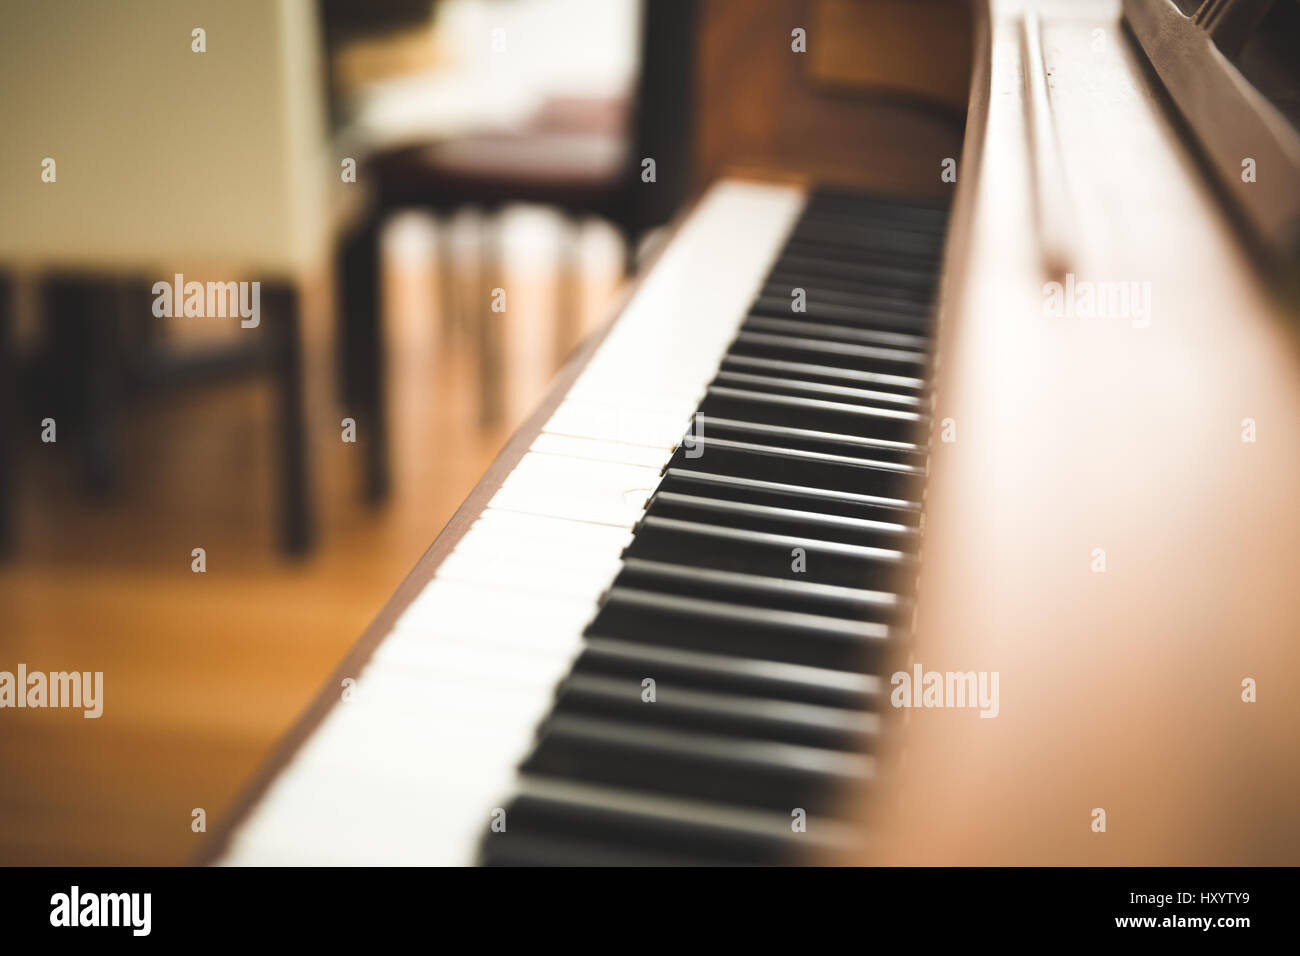 Black and white piano keys on a wooden upright piano. Stock Photo